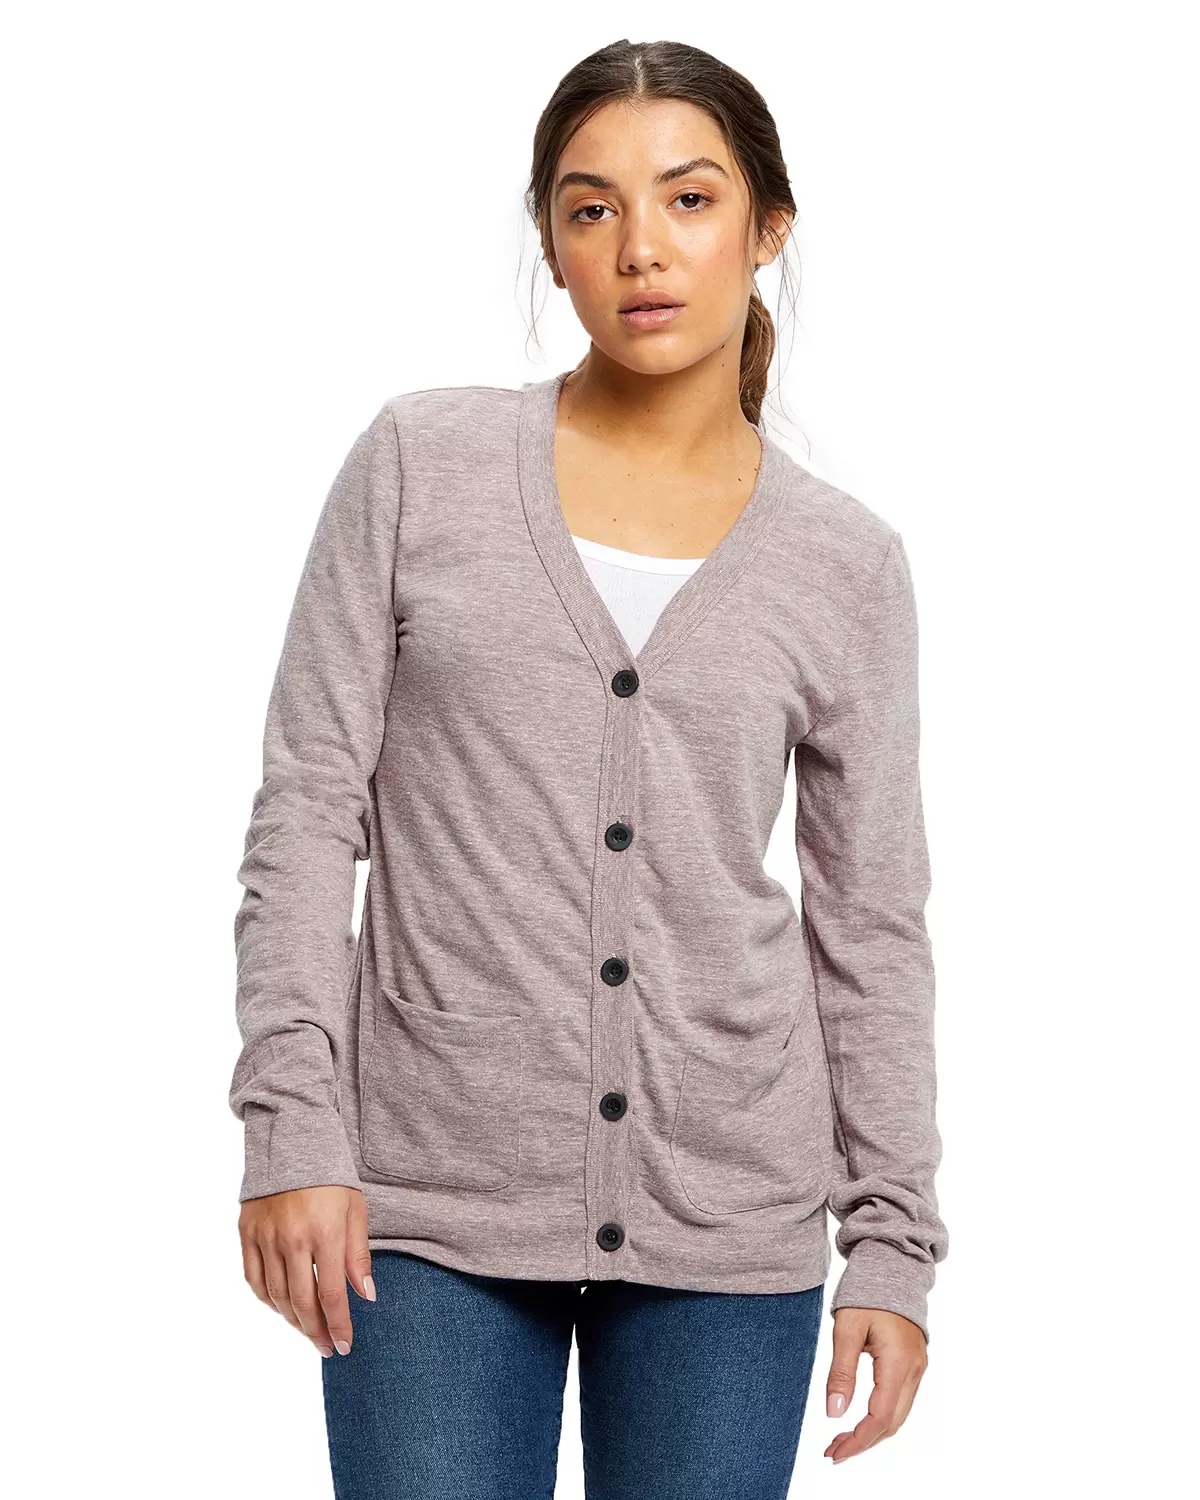 US Blanks US950 Women's Tri-Blend Cardigan - From $18.41